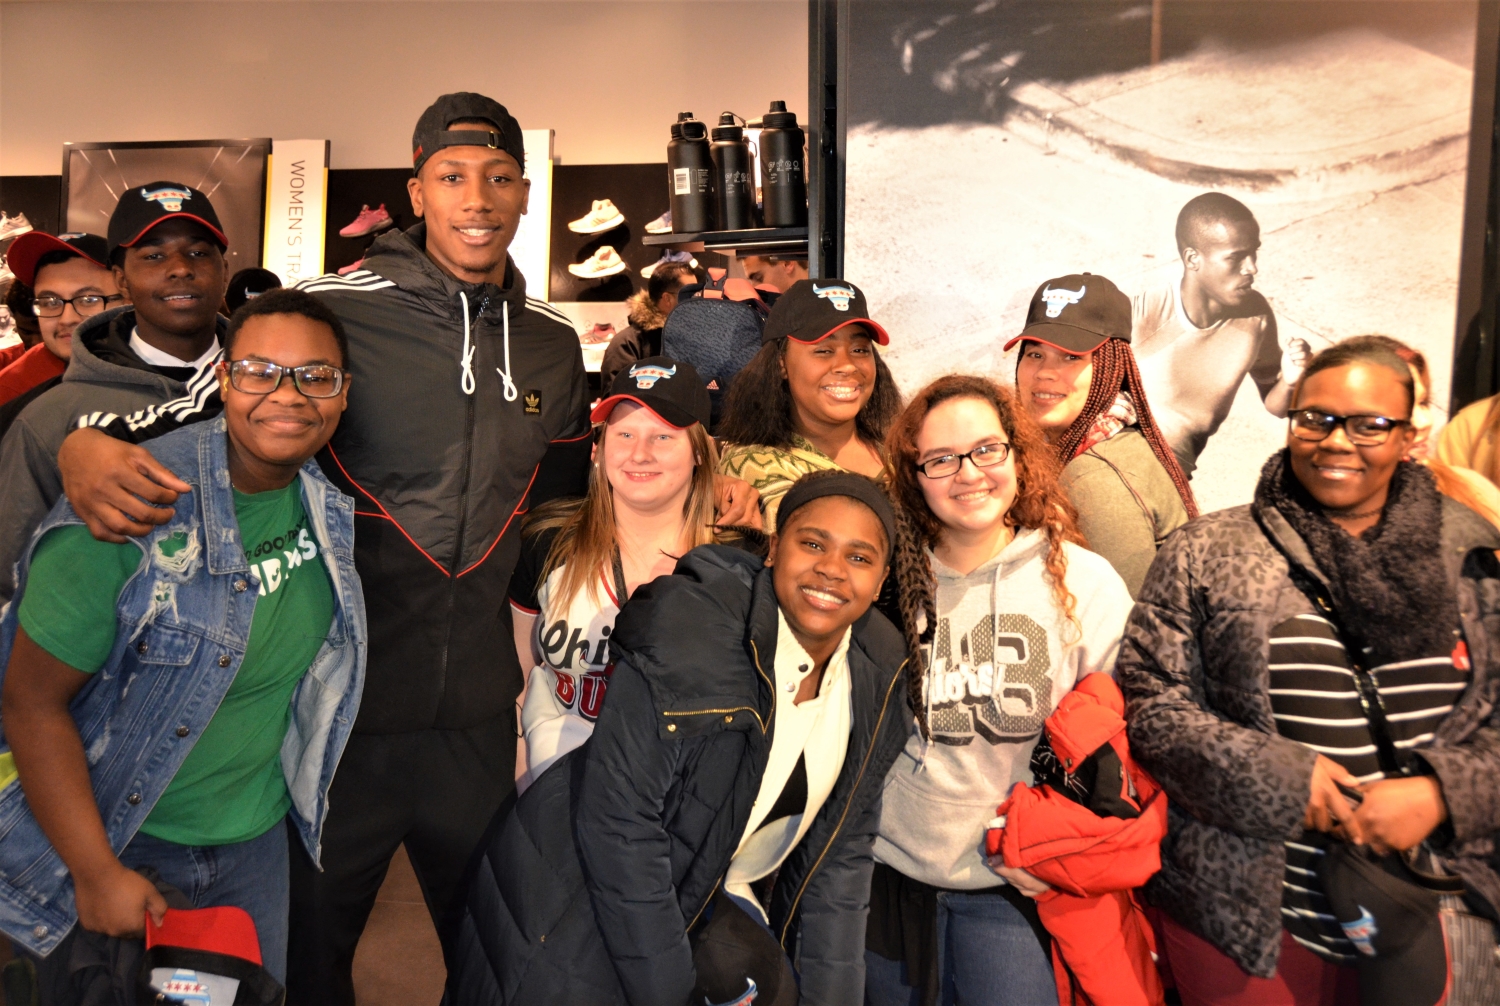 Chicago Bulls' Kris Dunn Surprises Youth with Adidas Shopping